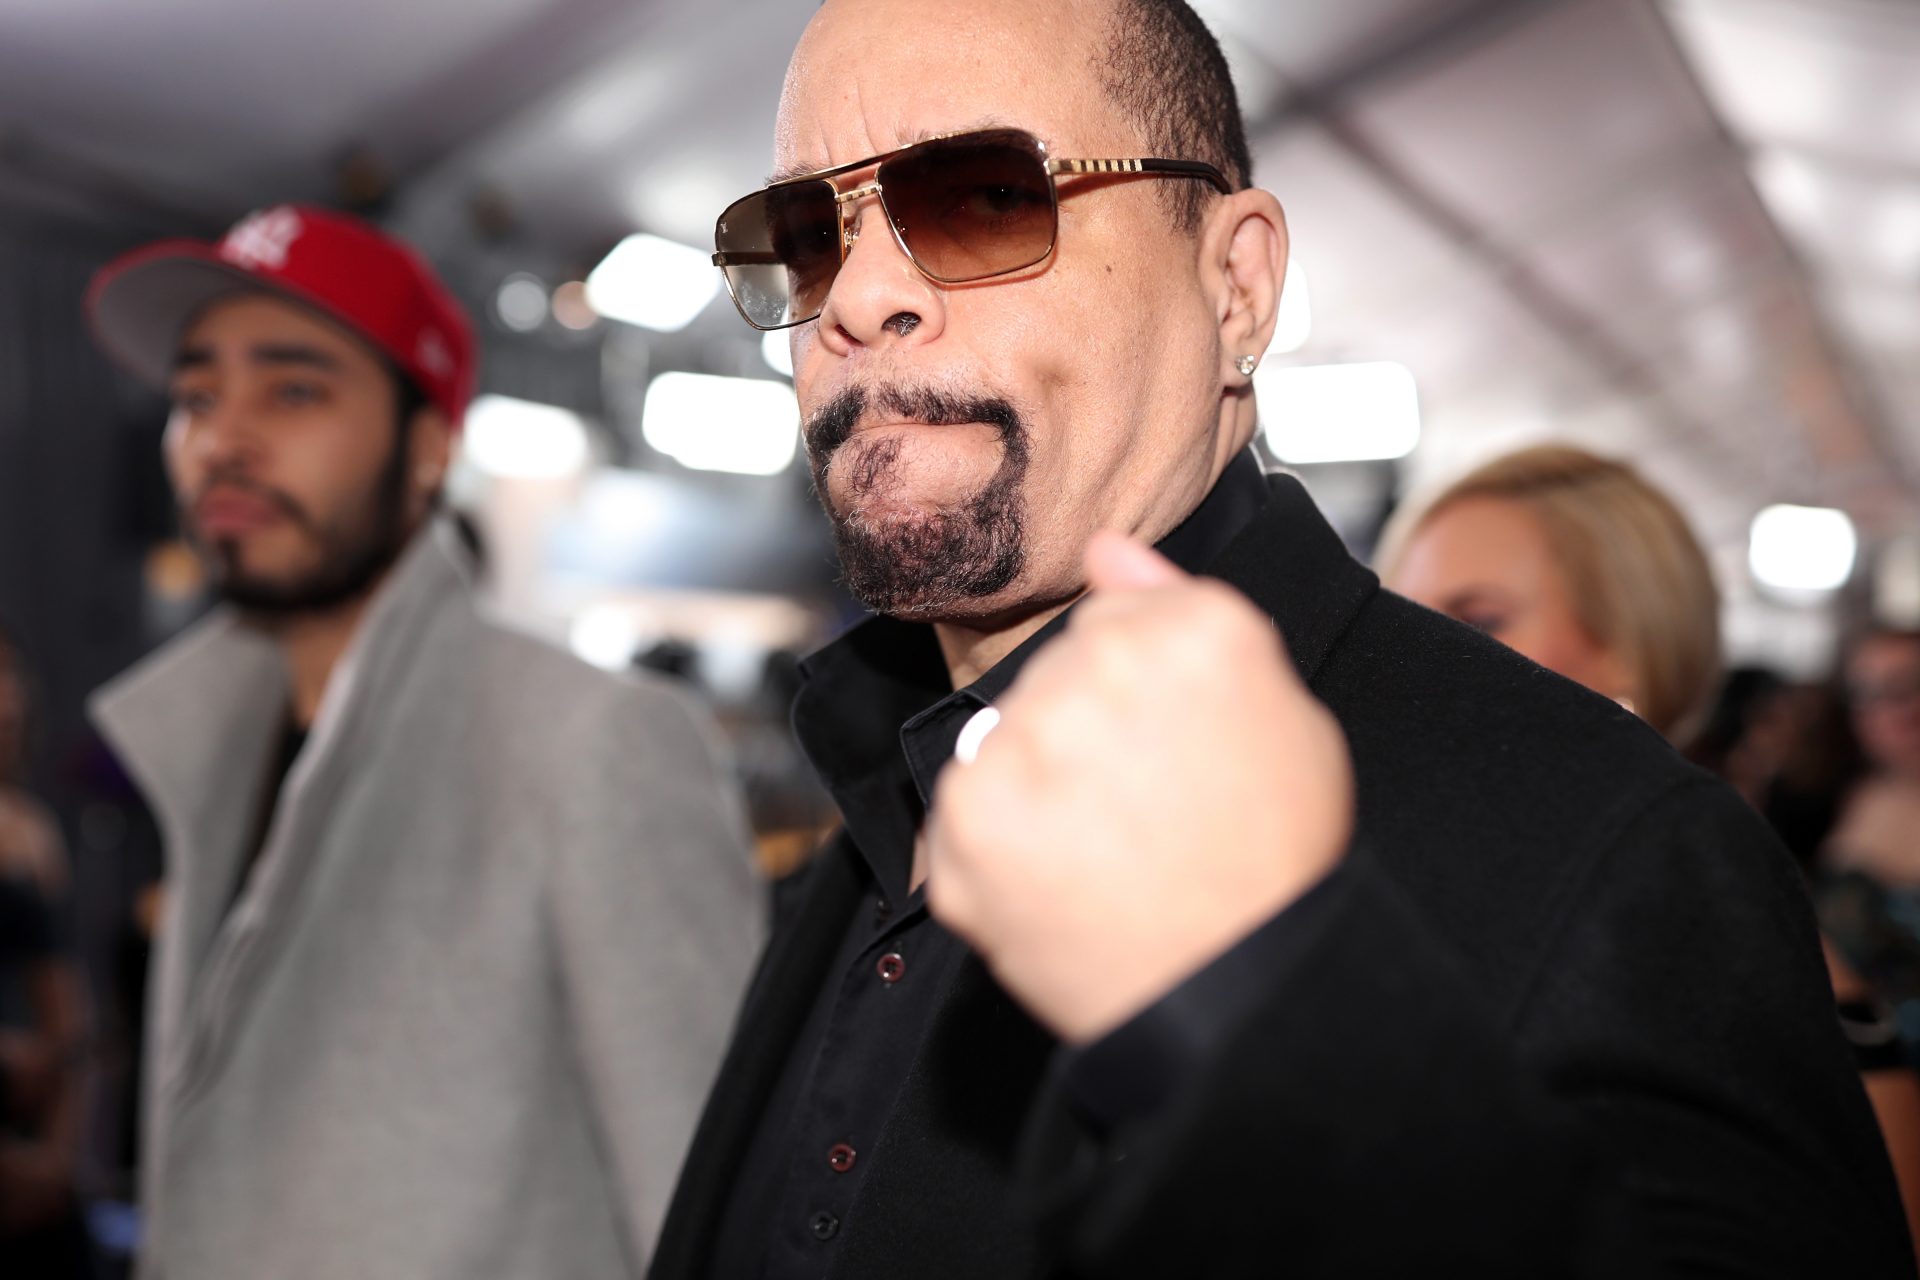 Ice-T: “She stood for something… unlike most people”